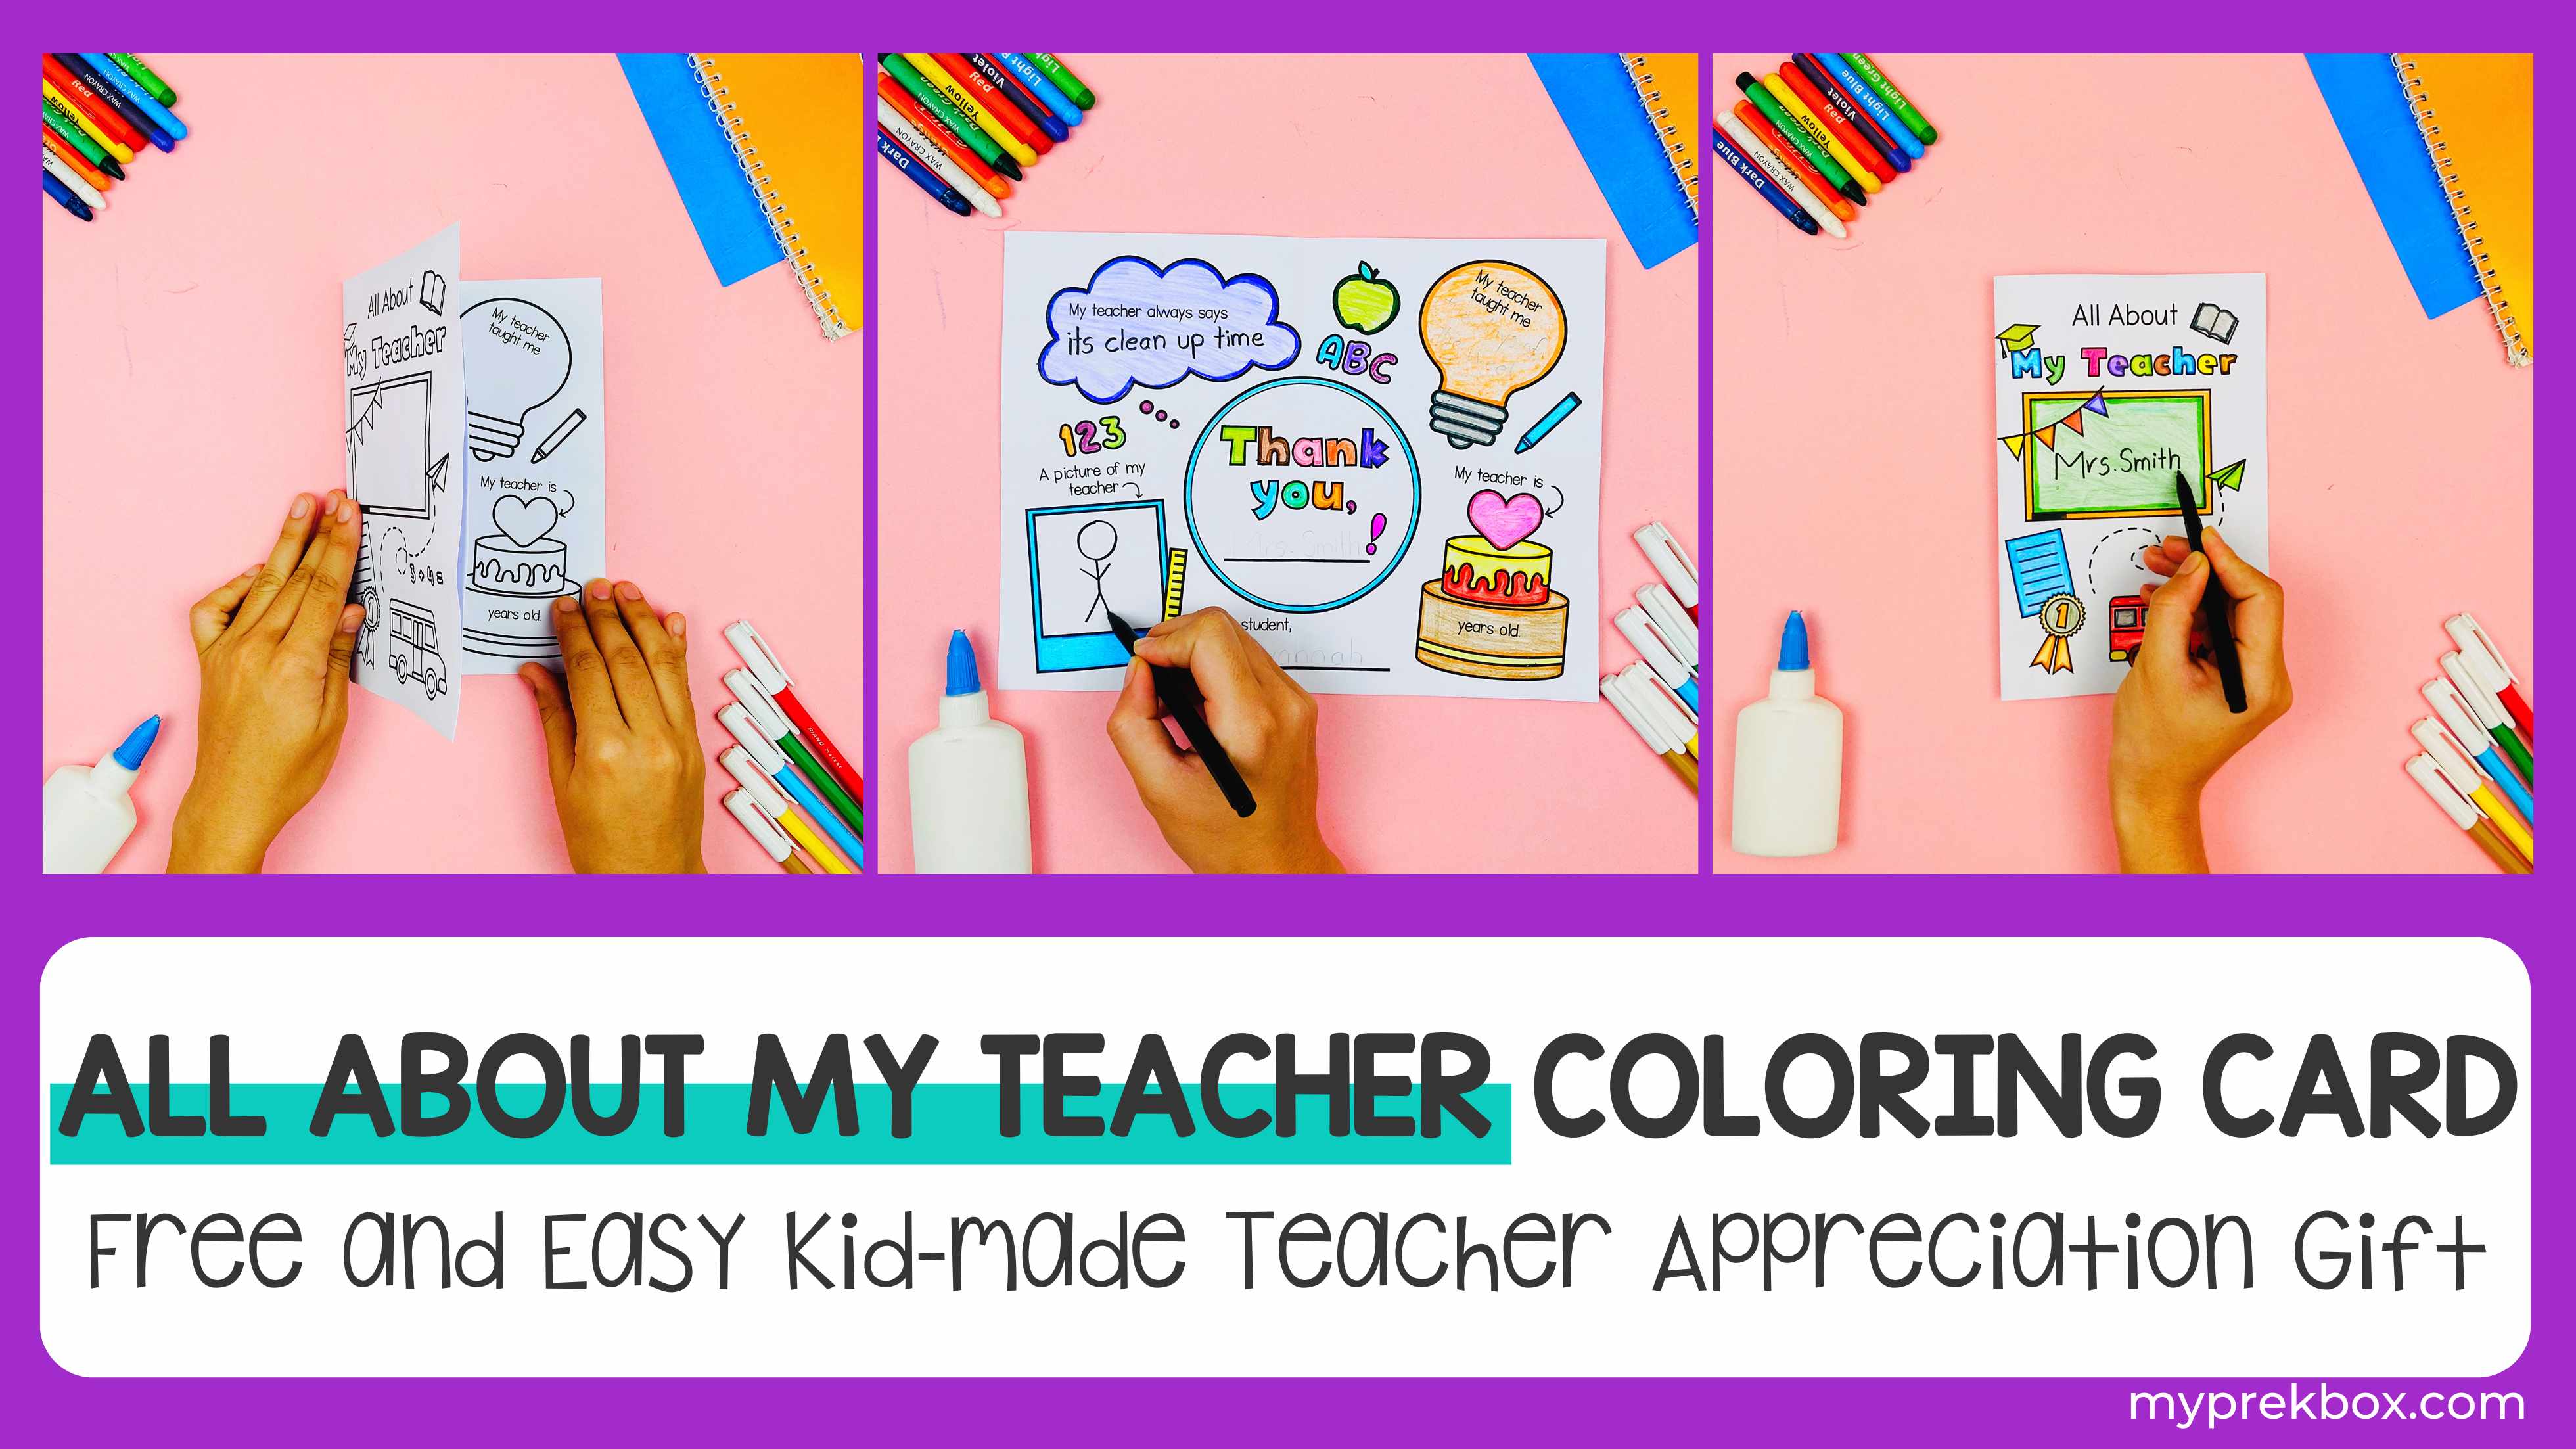 All About Teacher Coloring Card